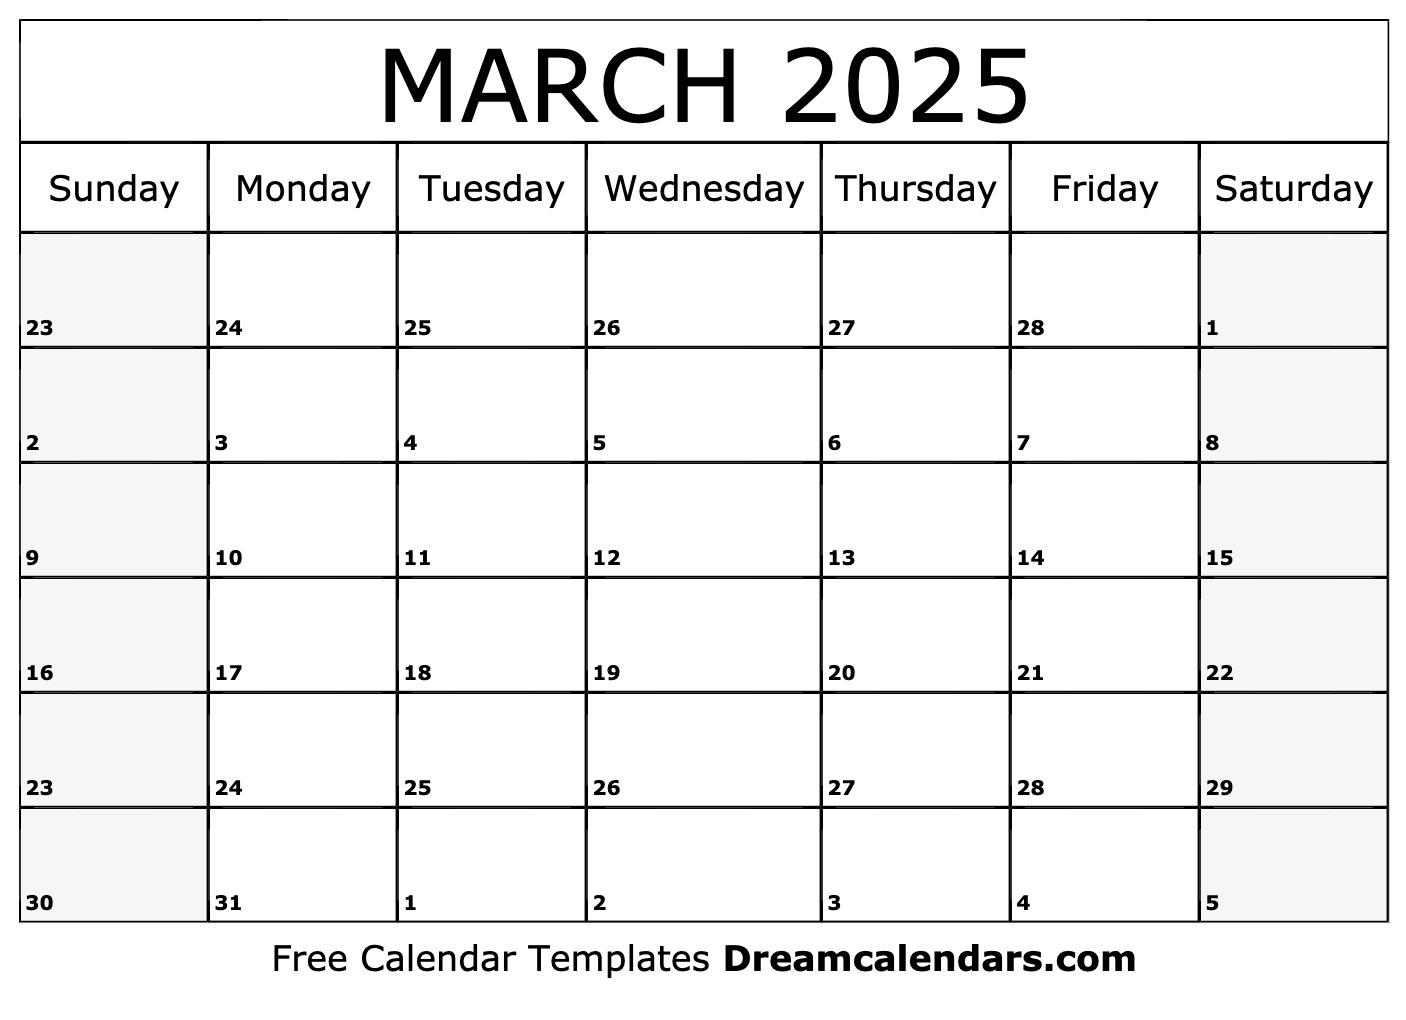 March 2025 Calendar Free Blank Printable With Holidays